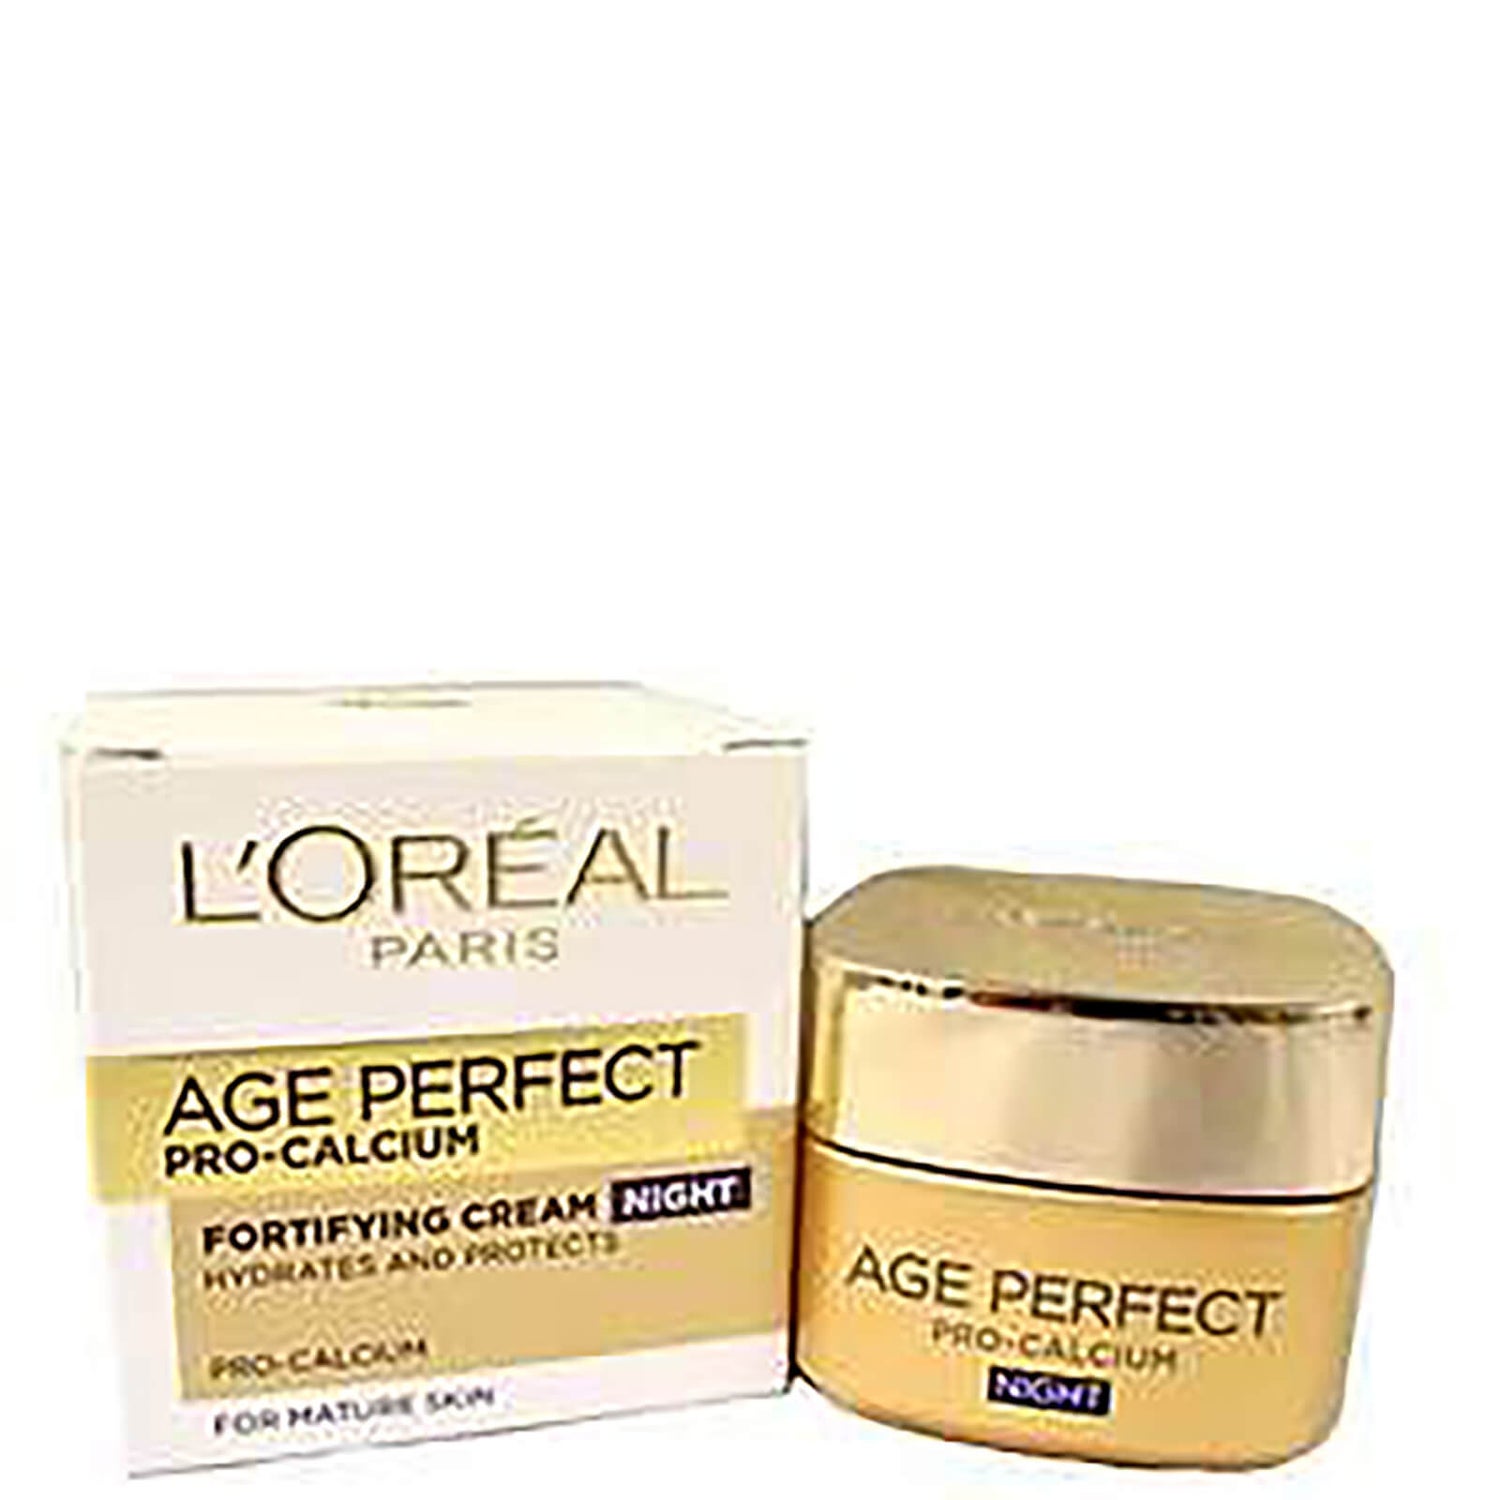 L'Oréal Paris Dermo Expertise Age Perfect Pro Calcium Fortifying Night Cream (50ml)